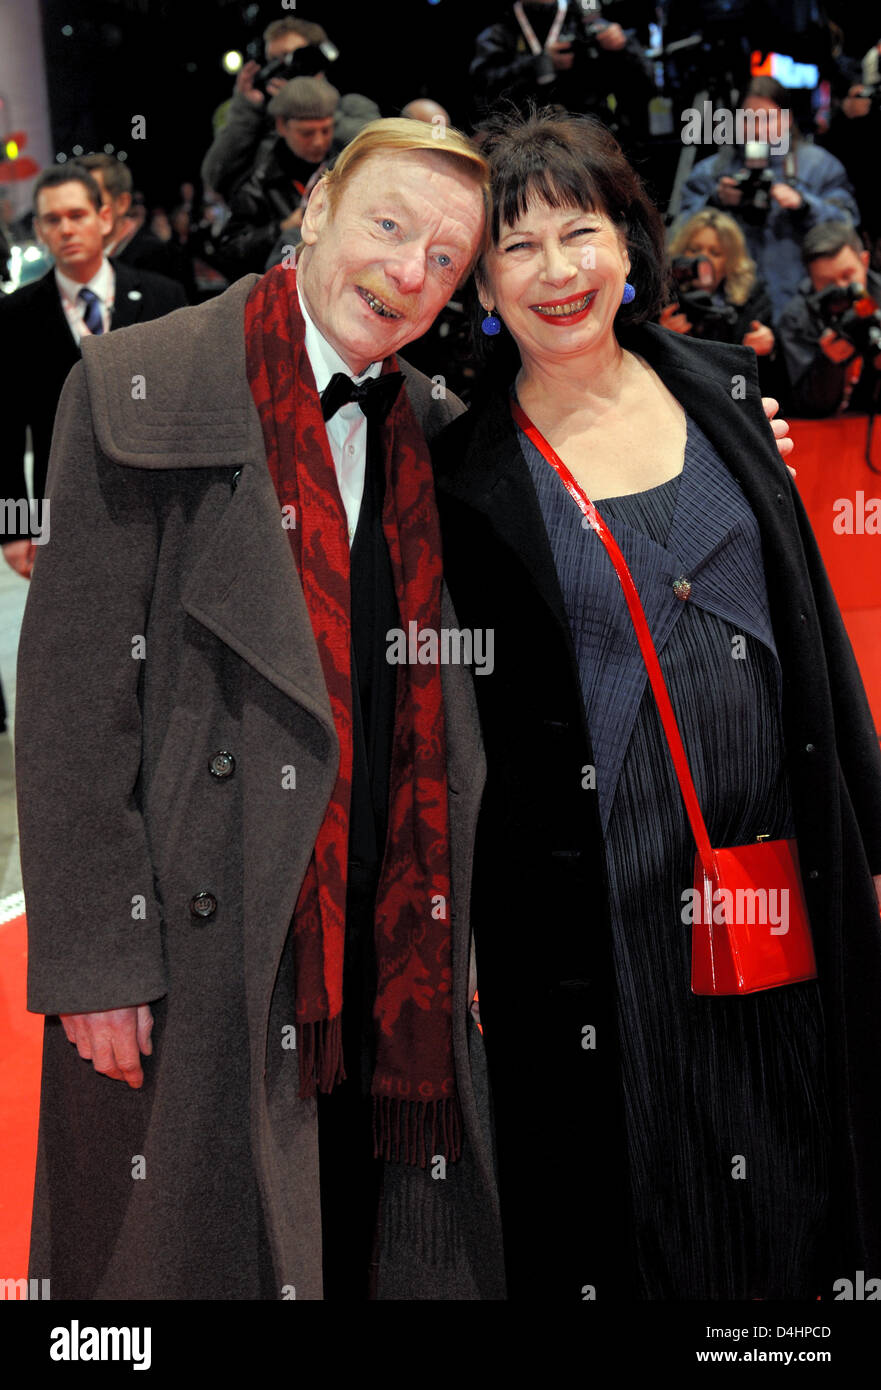 German actor Otto Sander and his wife, actress Monika Hansen, arrive for the premiere of the film ?The International? at the 59th Berlin International Film Festival, also referred to as Berlinale, in Berlin, Germany, 05 February 2009. The film opens the 59th Berlinale at Potsdamer Platz. Within the scope of the official competition, 18 movies will compete for the golden and silver  Stock Photo